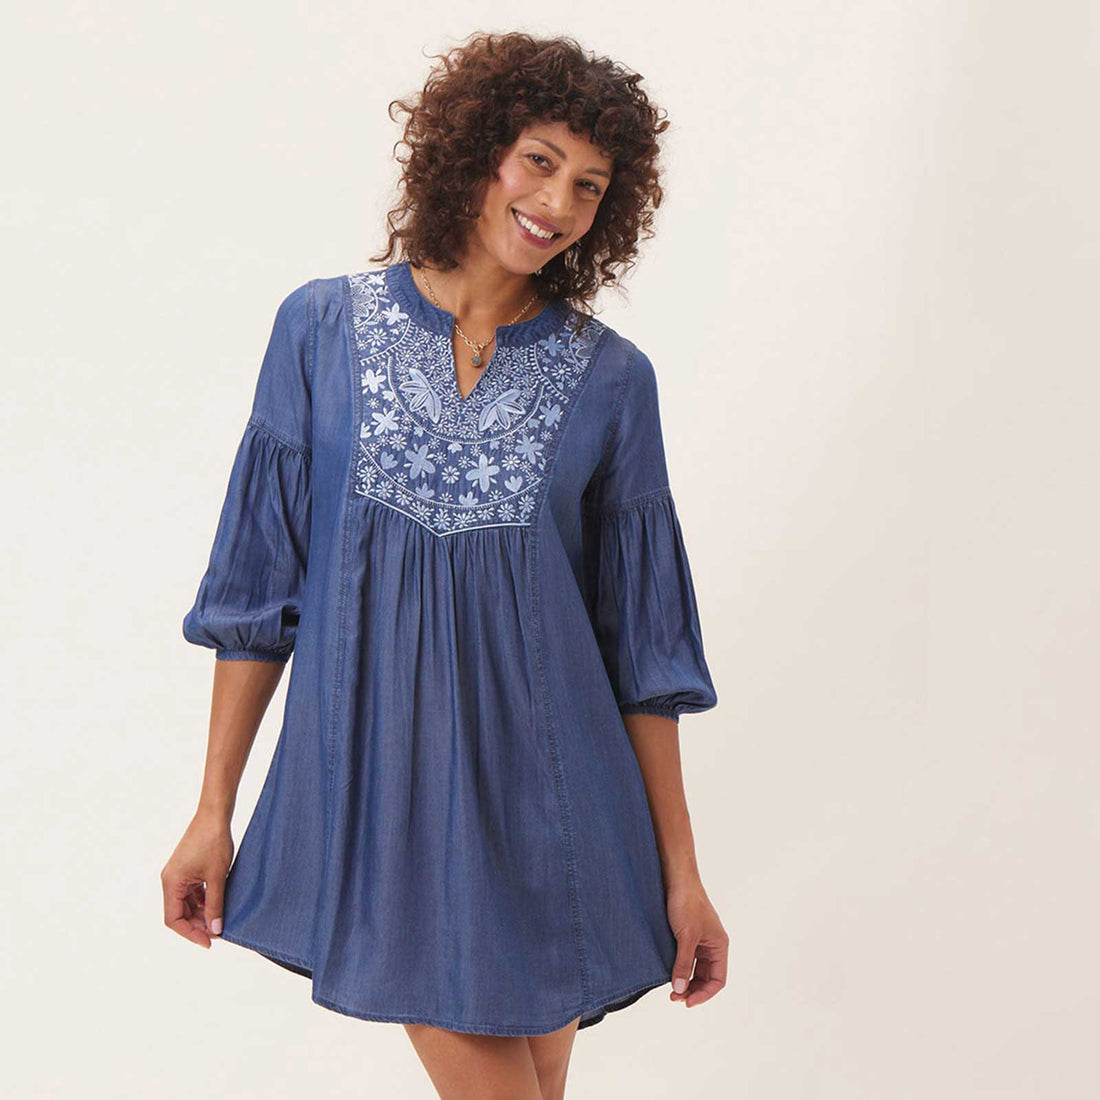 Chambray Dress With Light Blue Embroidery Dress - rockflowerpaper